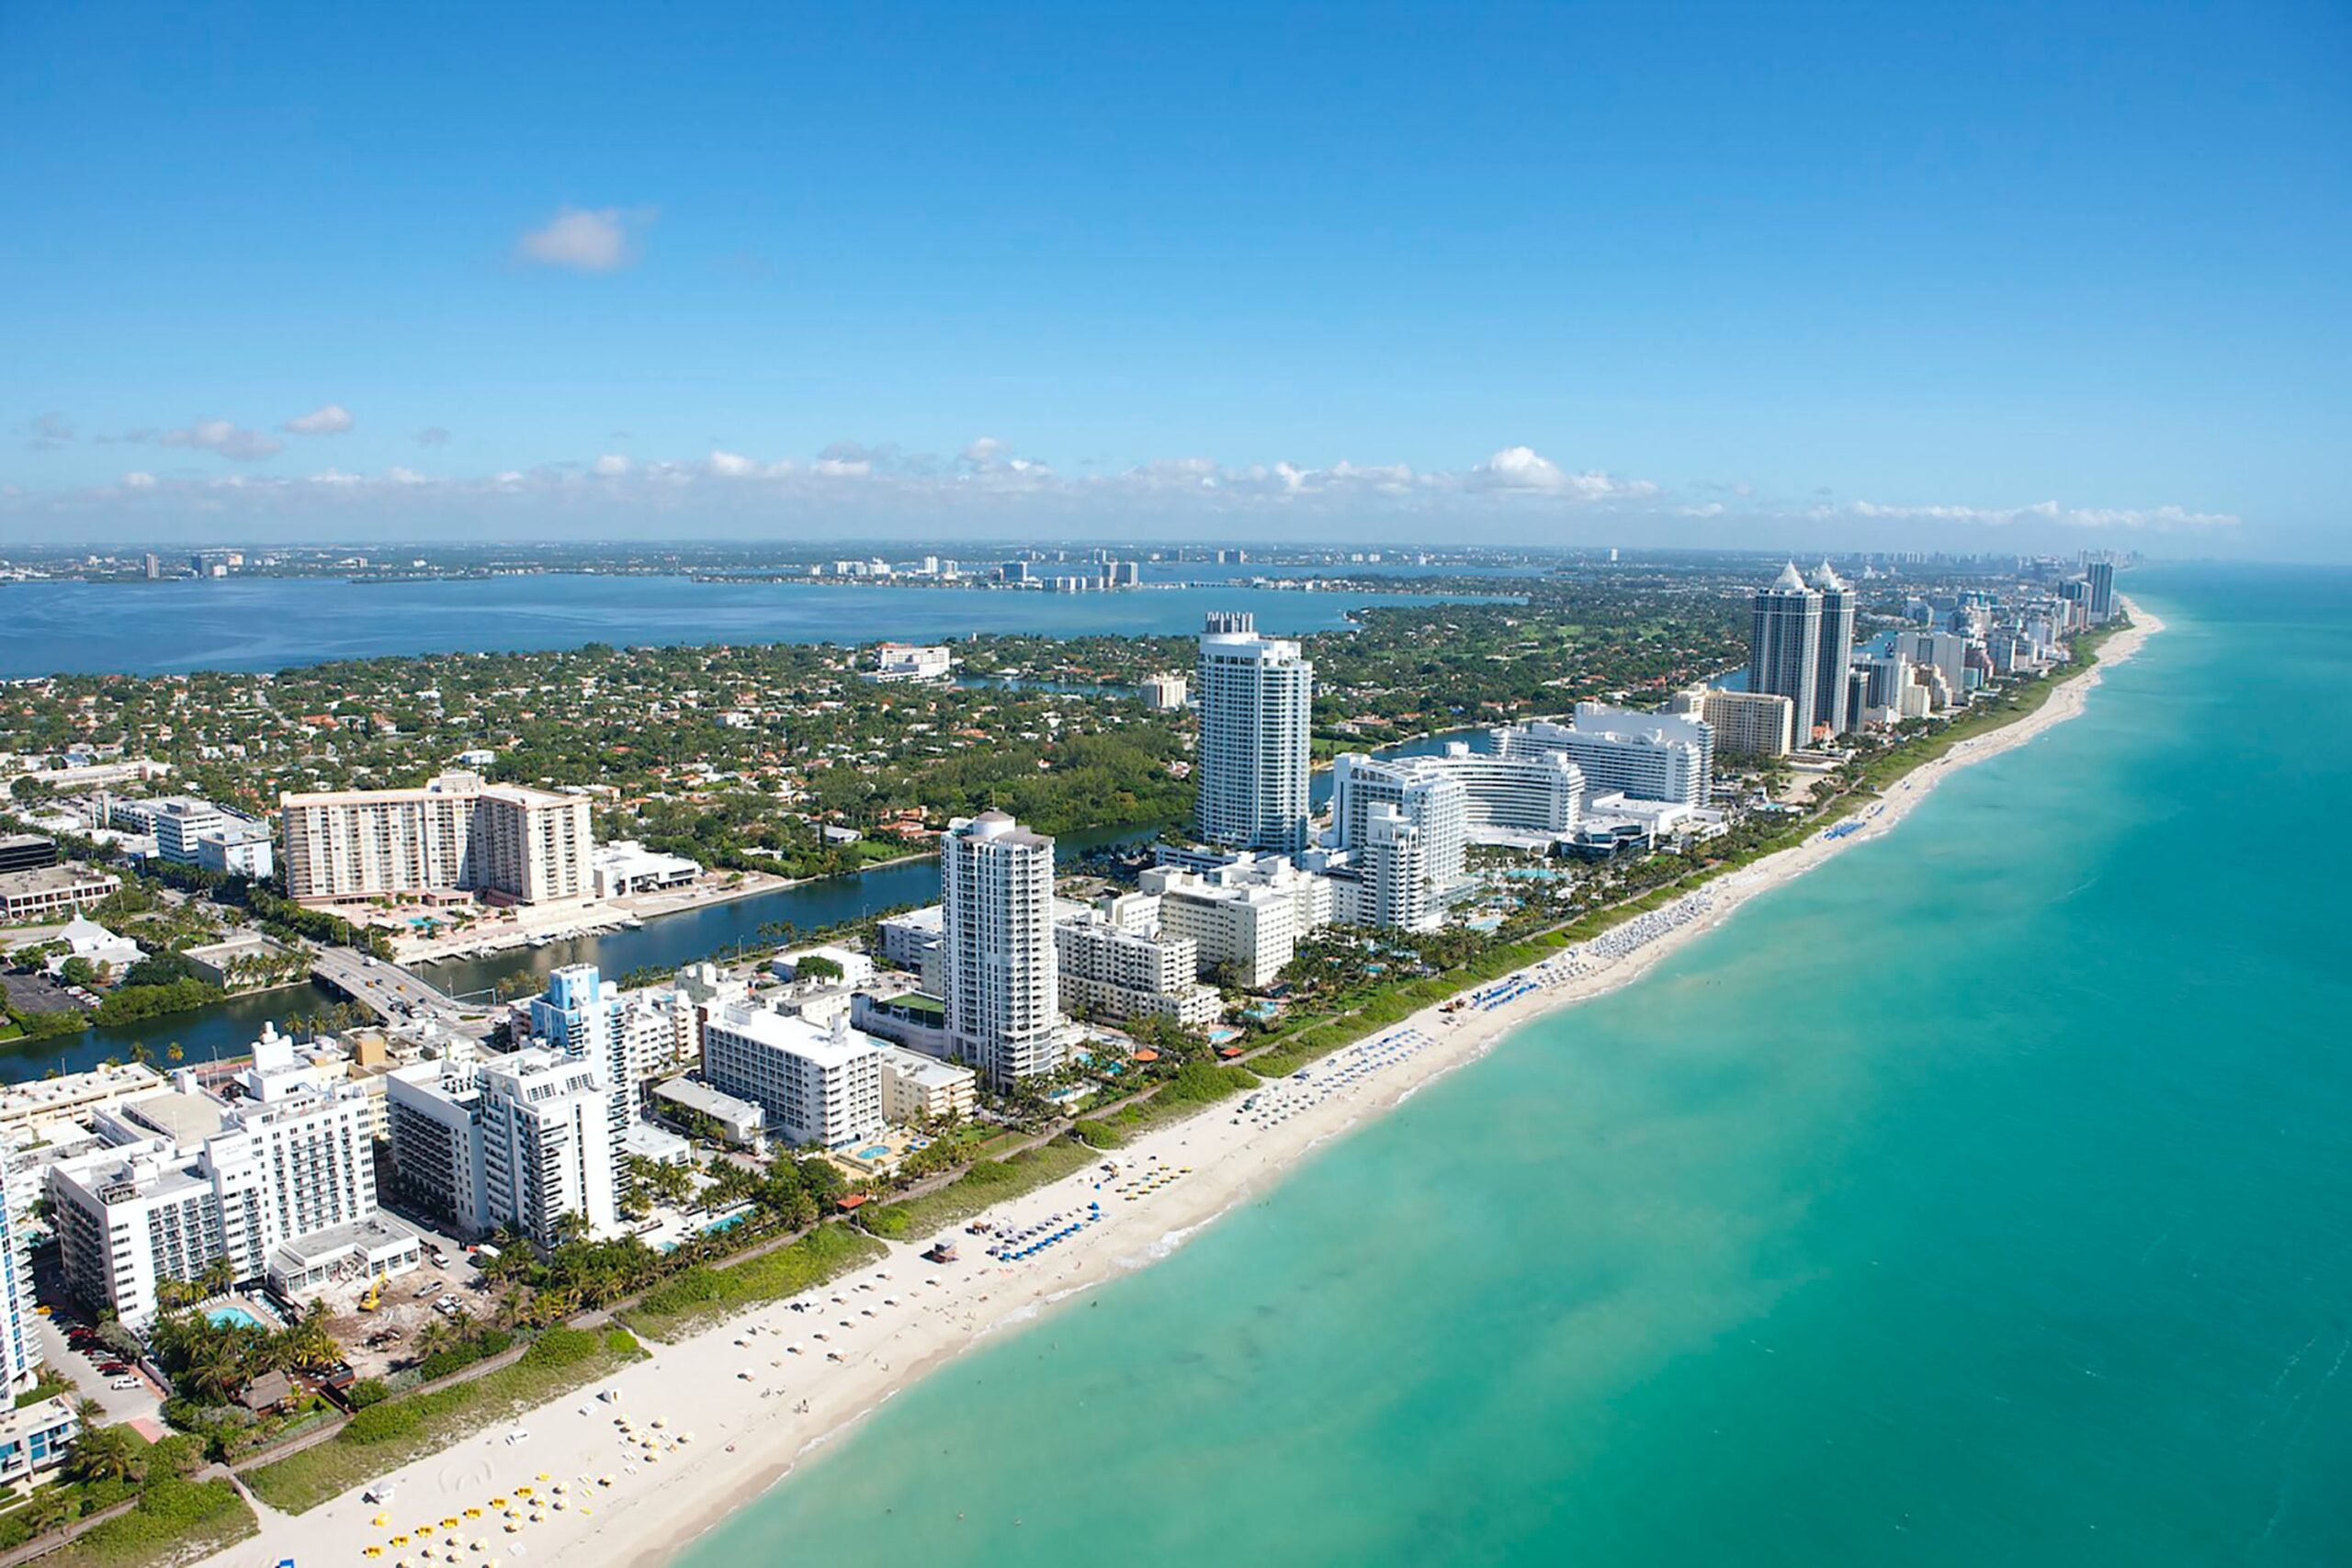 As a Spring Break and vacation destination, it's no wonder that Miami is a great place to live, especially for young professionals. It's also one of the most expensive cities in the U.S. to live in because of proximity to beaches, nightlife and activities. Pictured: An aerial view of Miami Beach.